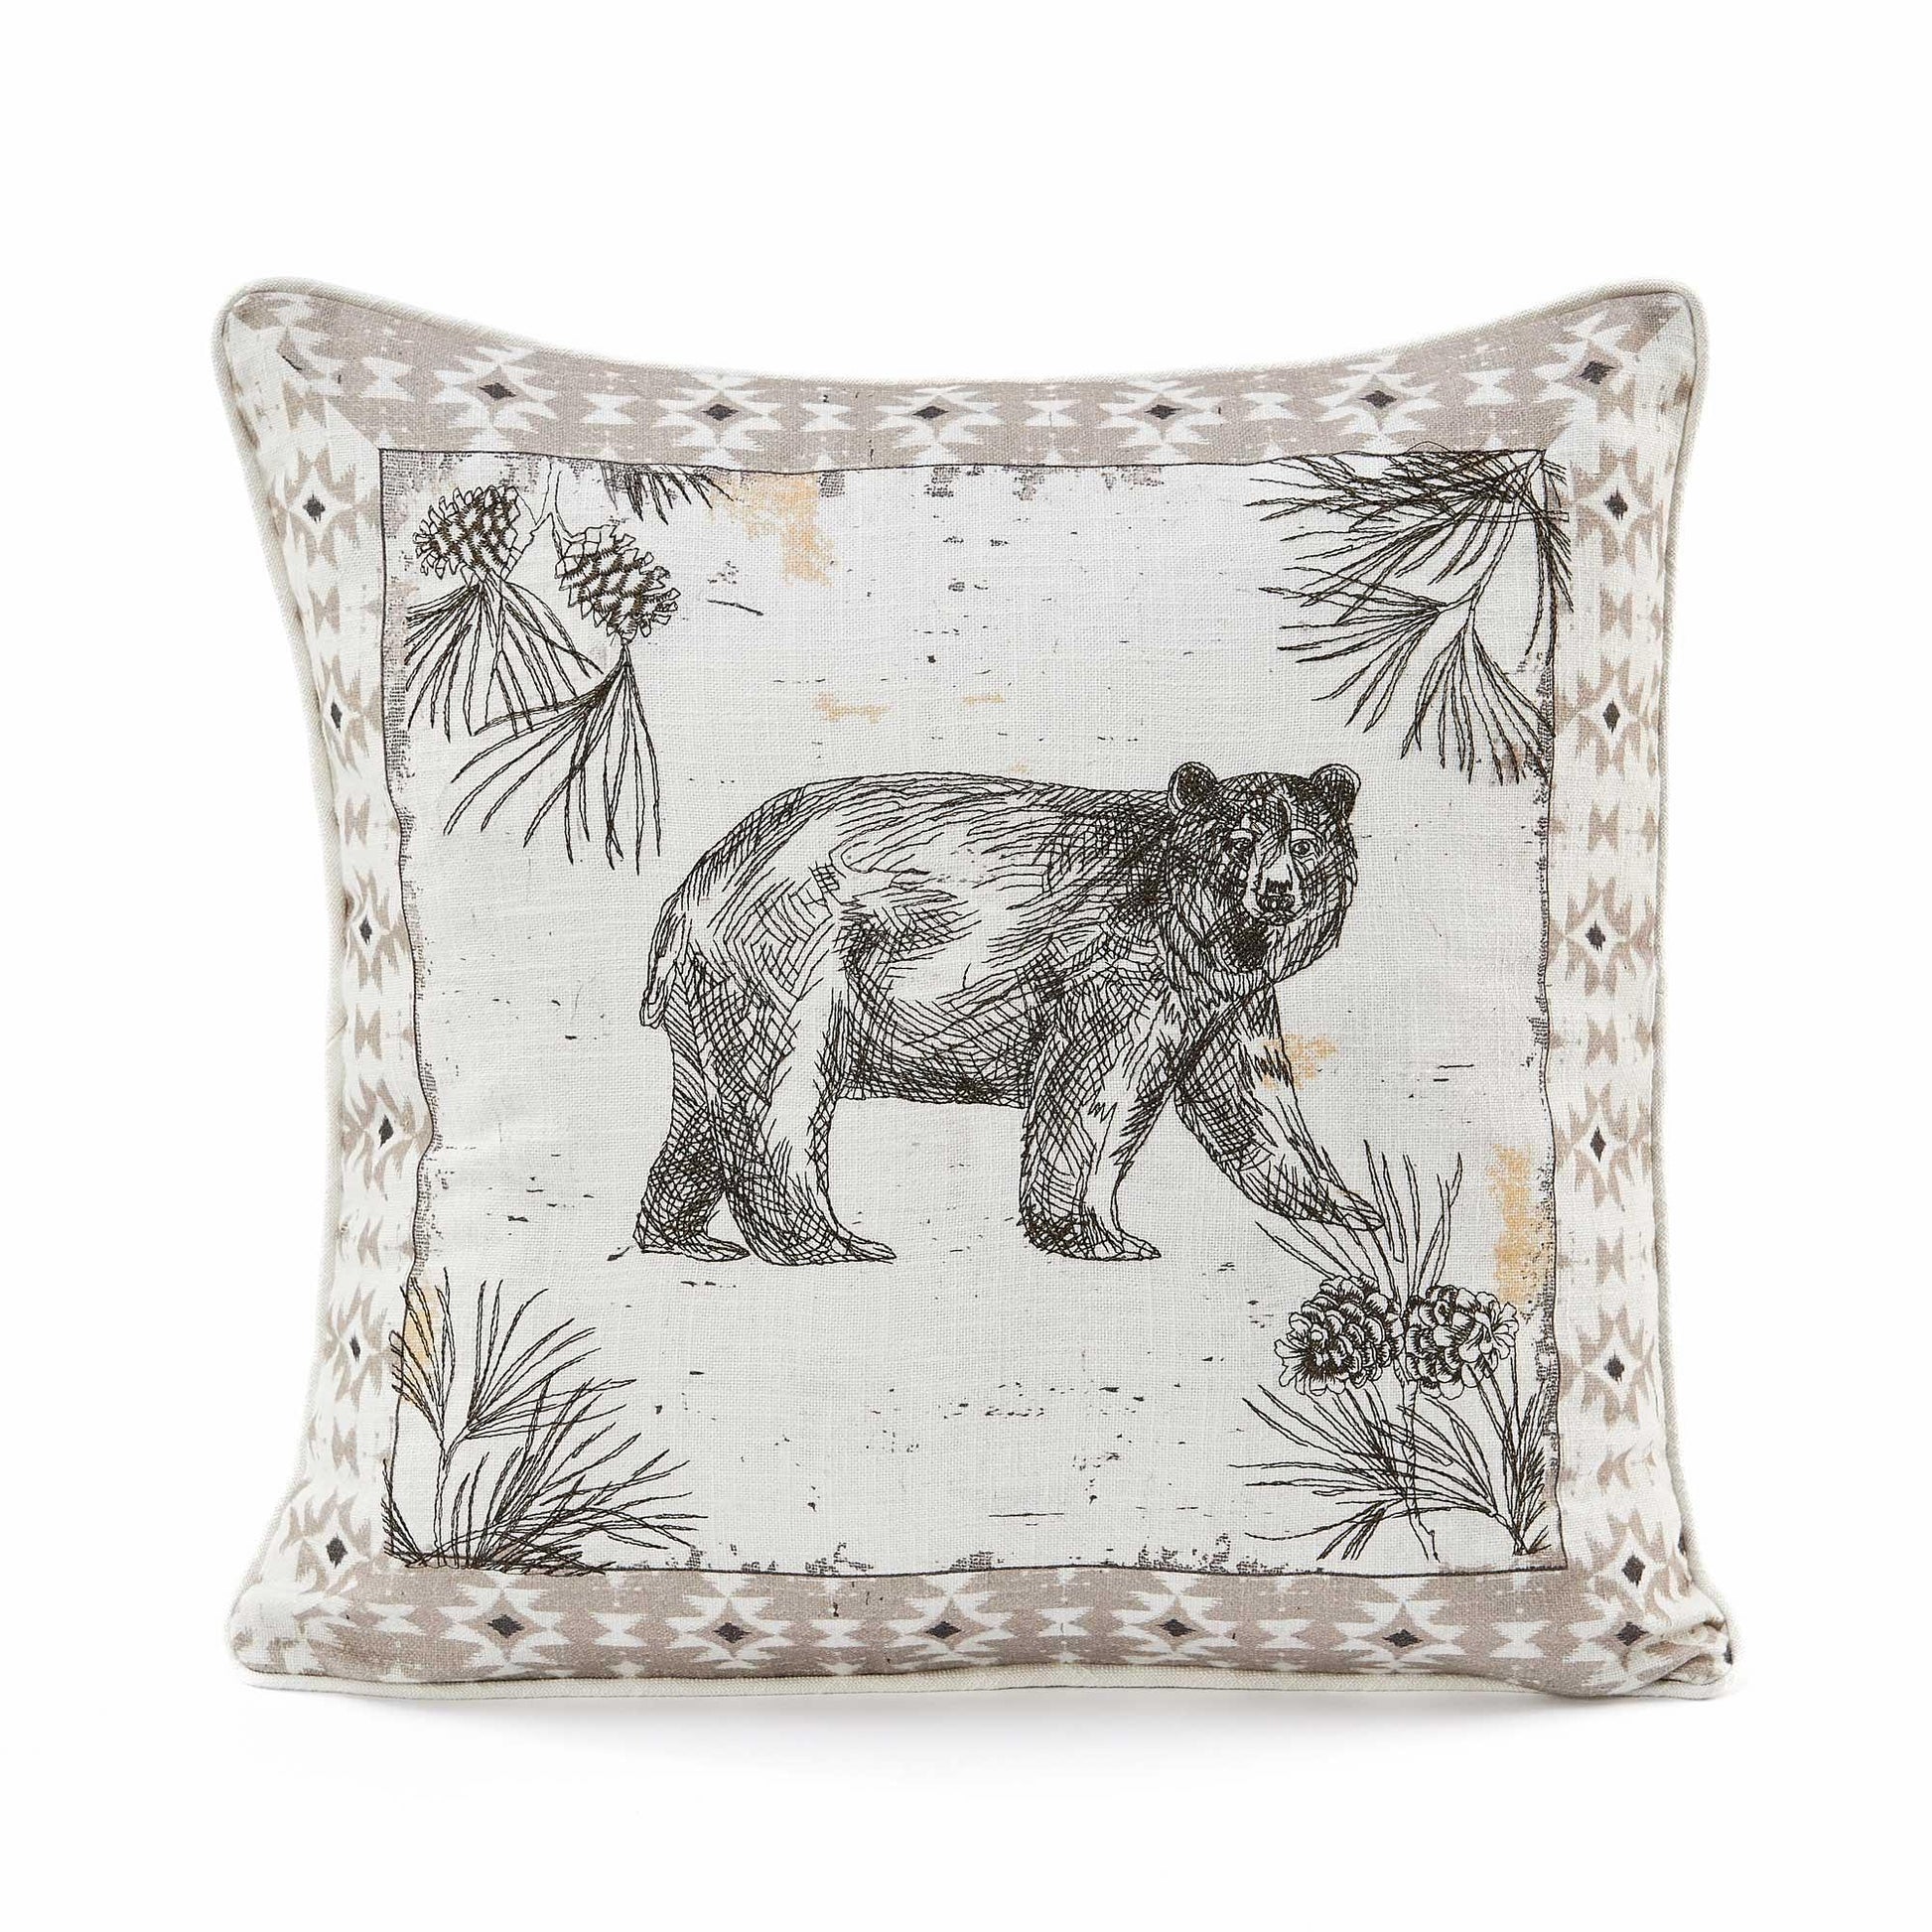 Serene Wilderness Lodge Poly Fill Pillow - Wild Wings